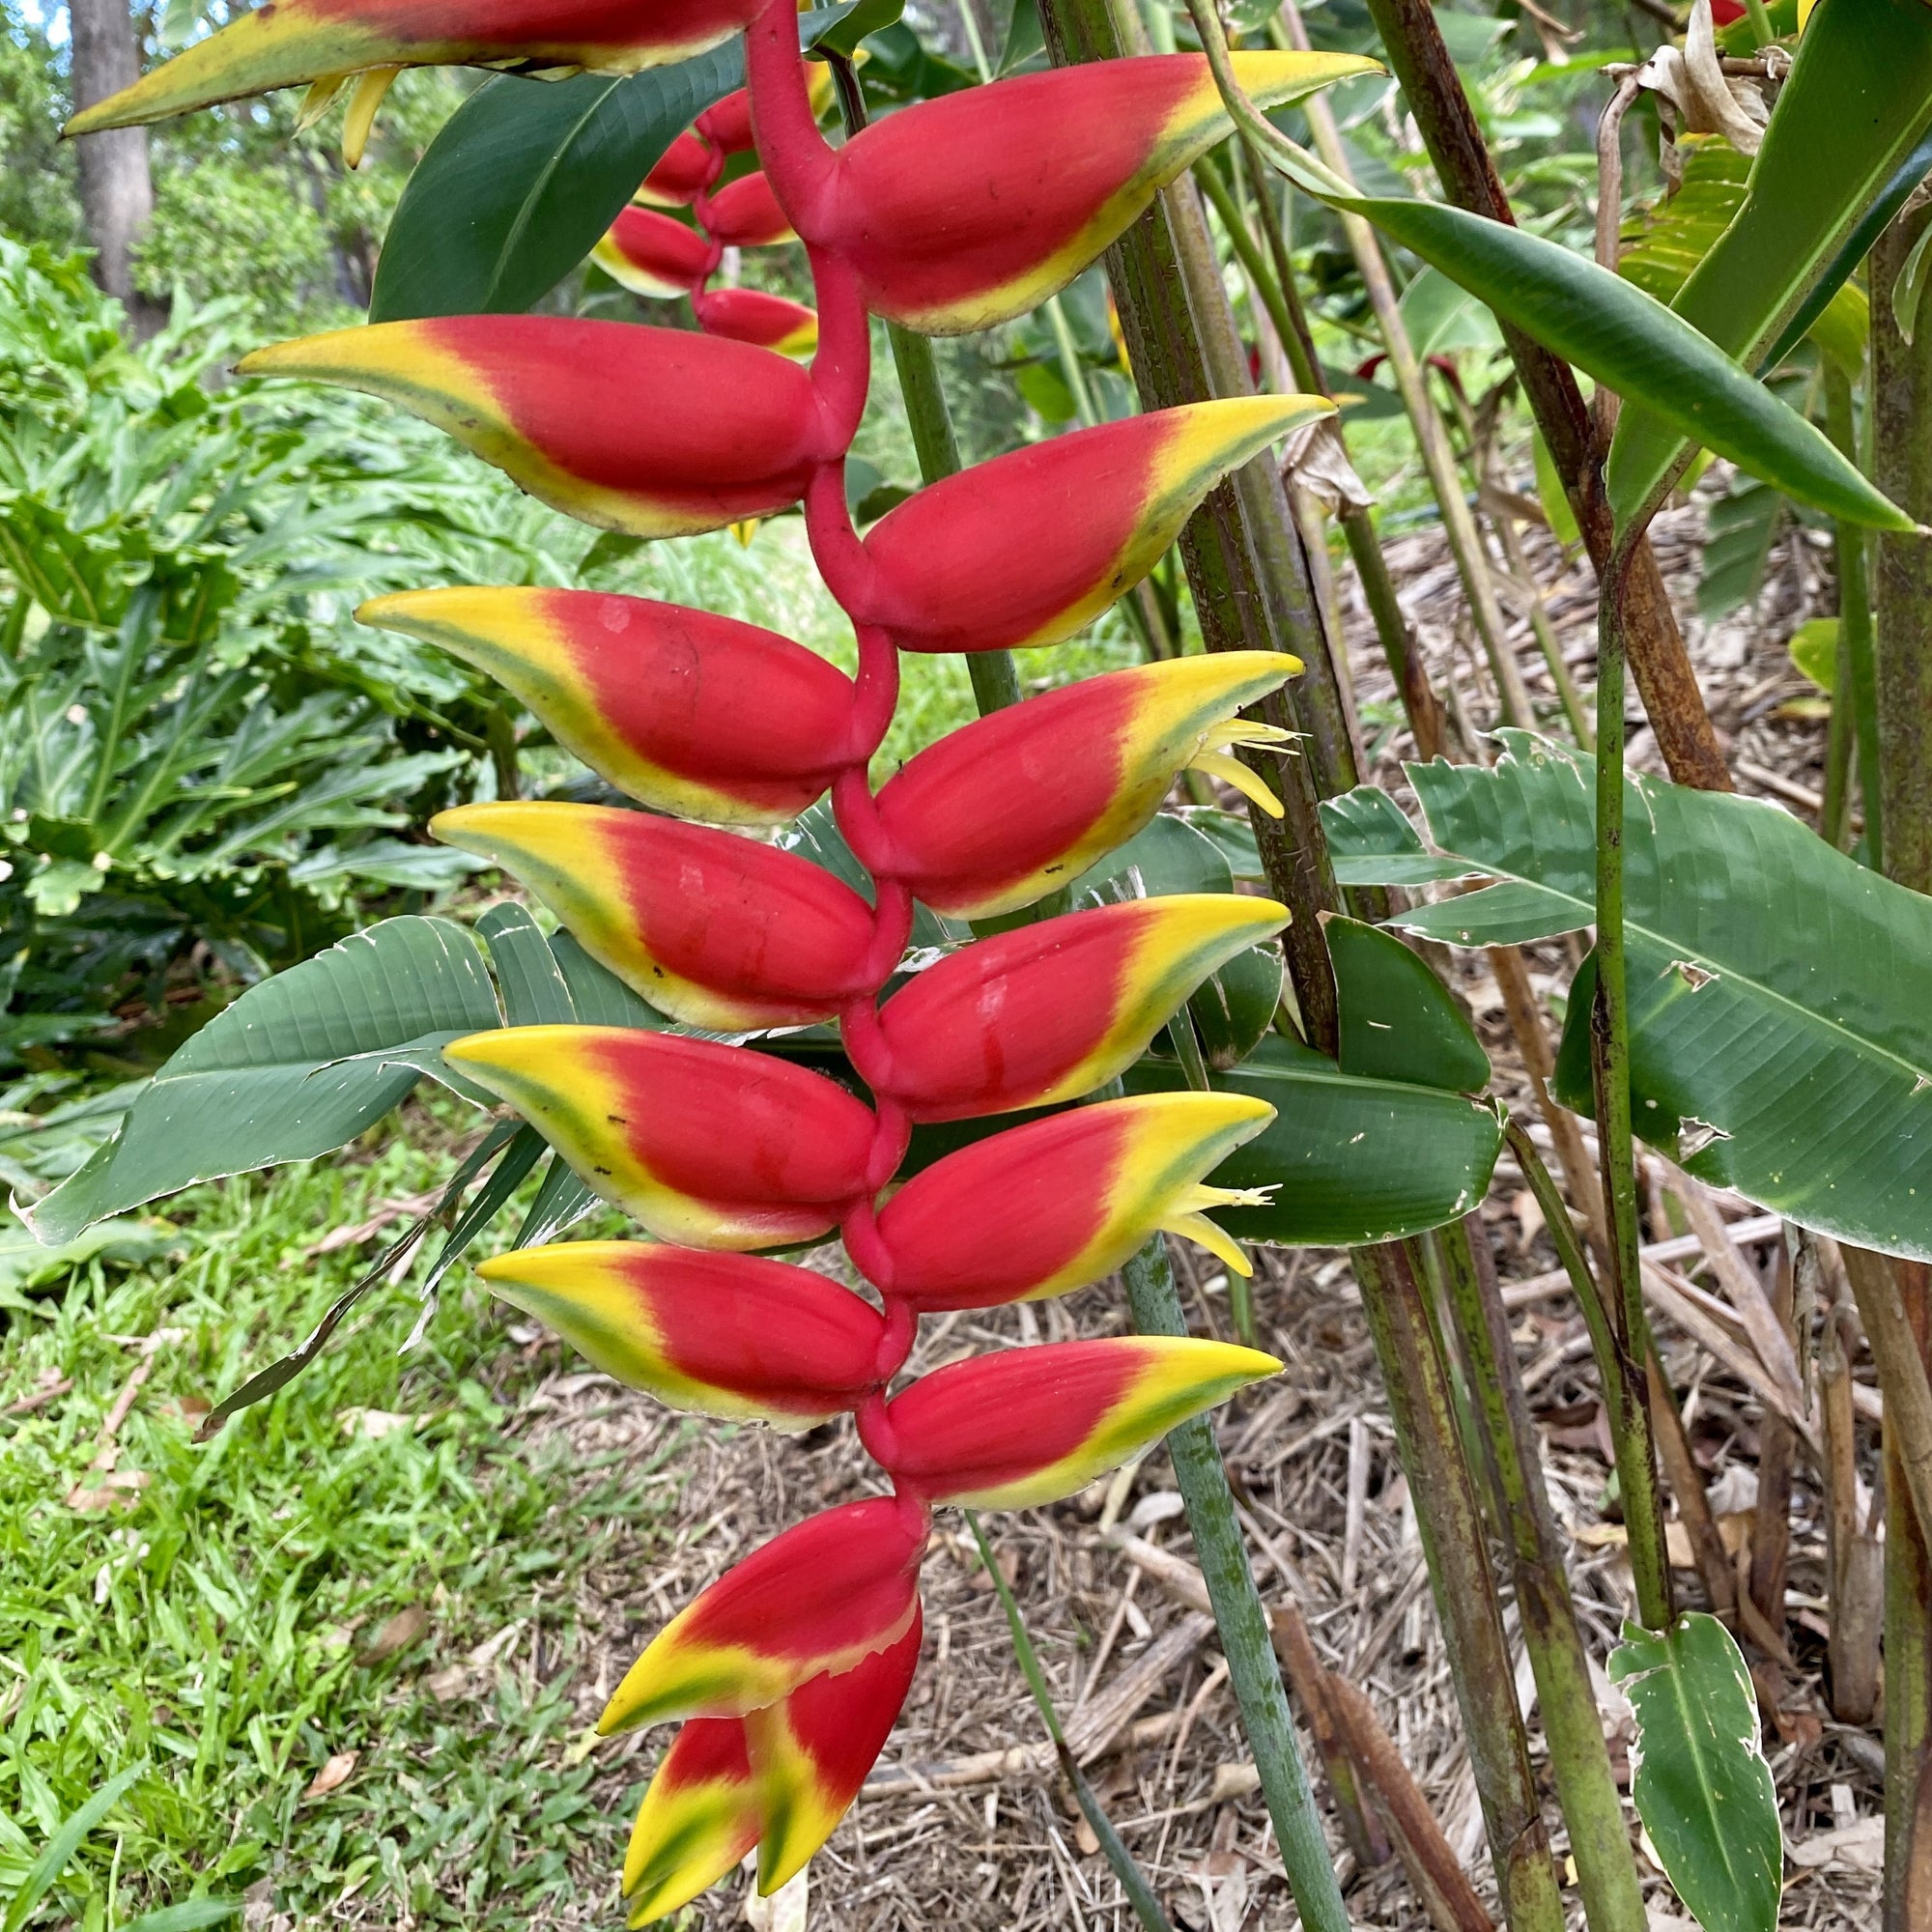 Heliconia rostrata is a tropical plant with striking, pendulant, waxy bracts of red with yellow and green tips